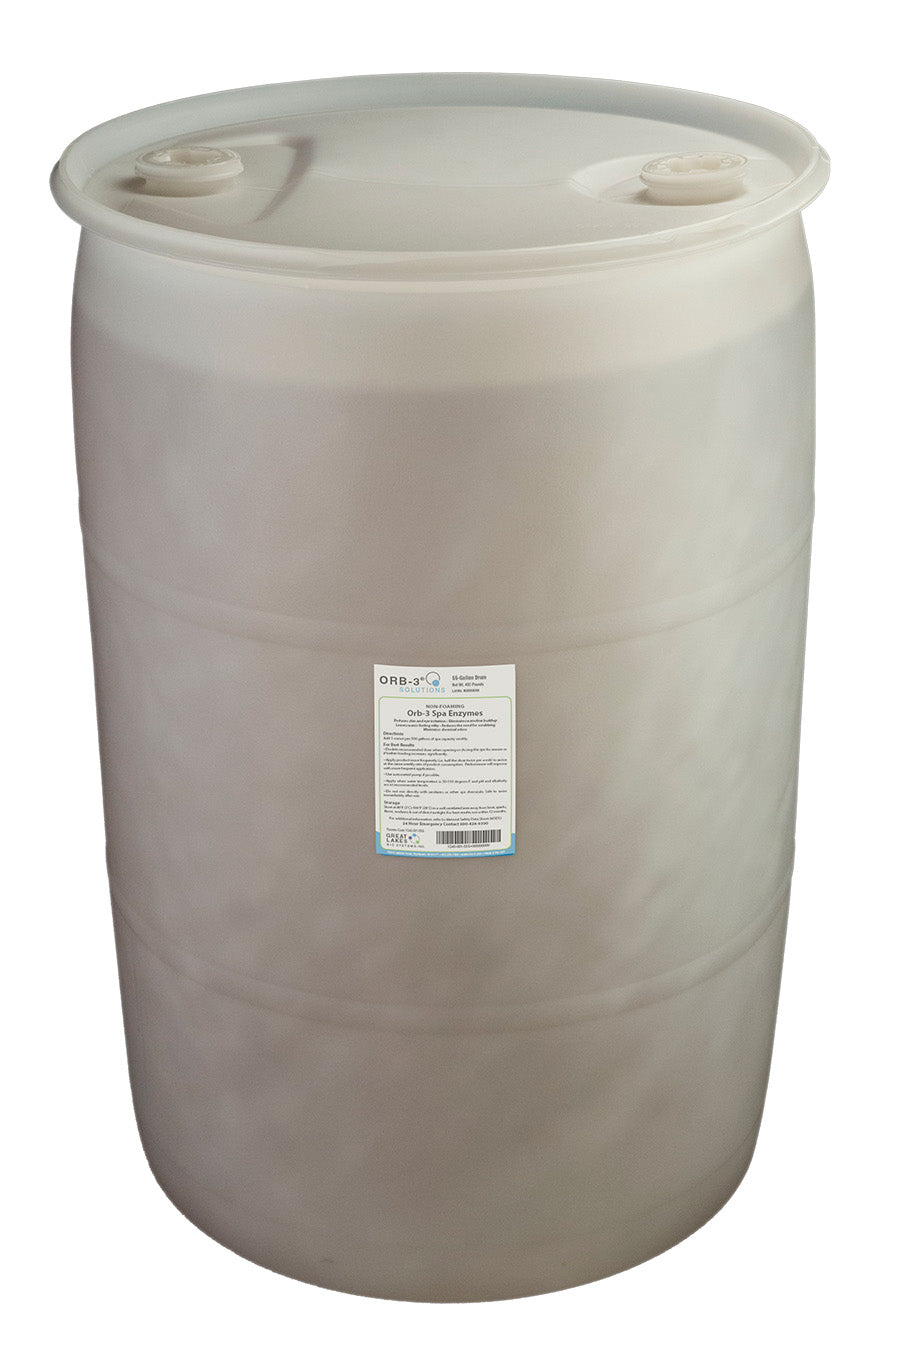 55 gallons of Orb-3 Spa Enzymes Non-Foaming Y240-001-55G